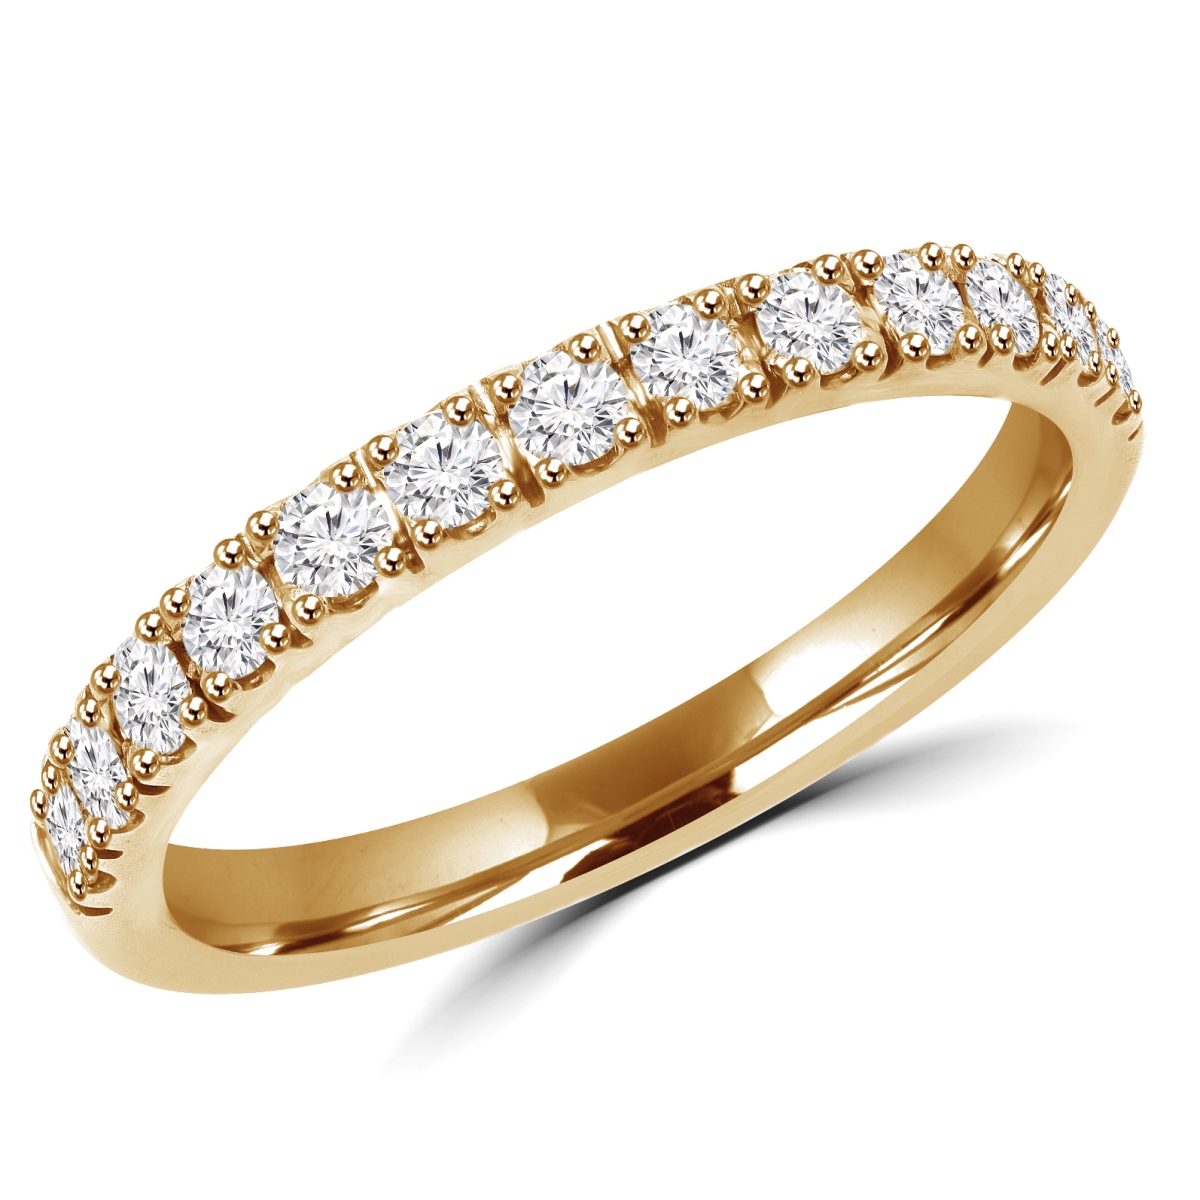 Picture of Majesty Diamonds MD180187-3.75 0.3 CTW Round Diamond Semi-Eternity Wedding Band Ring in 14K Yellow Gold - Size 3.75